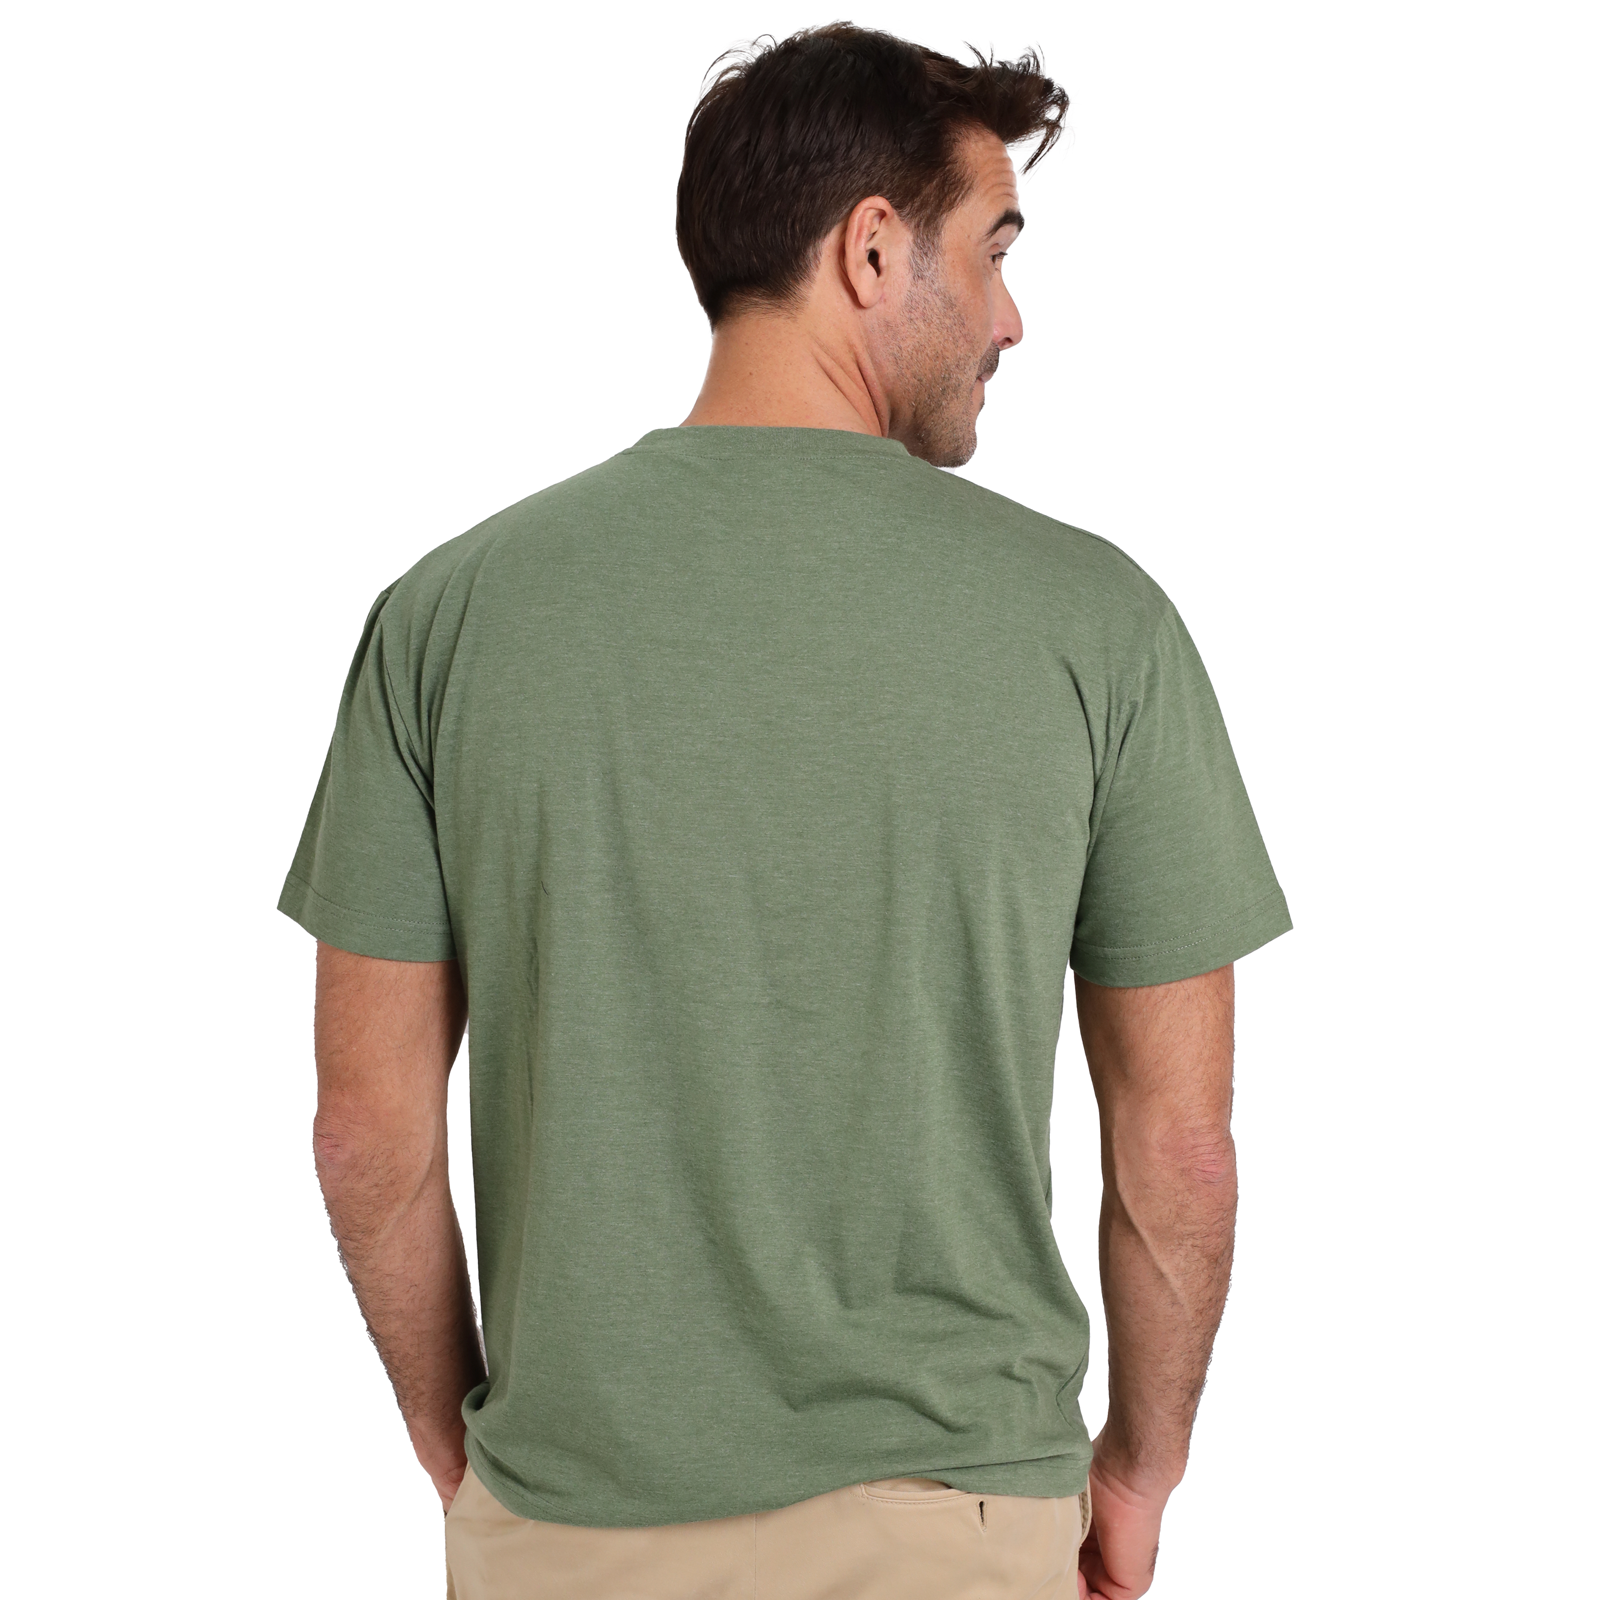 The back view of a man wearing a green distressed Guinness UK Green Distressed Irish Label T-Shirt.